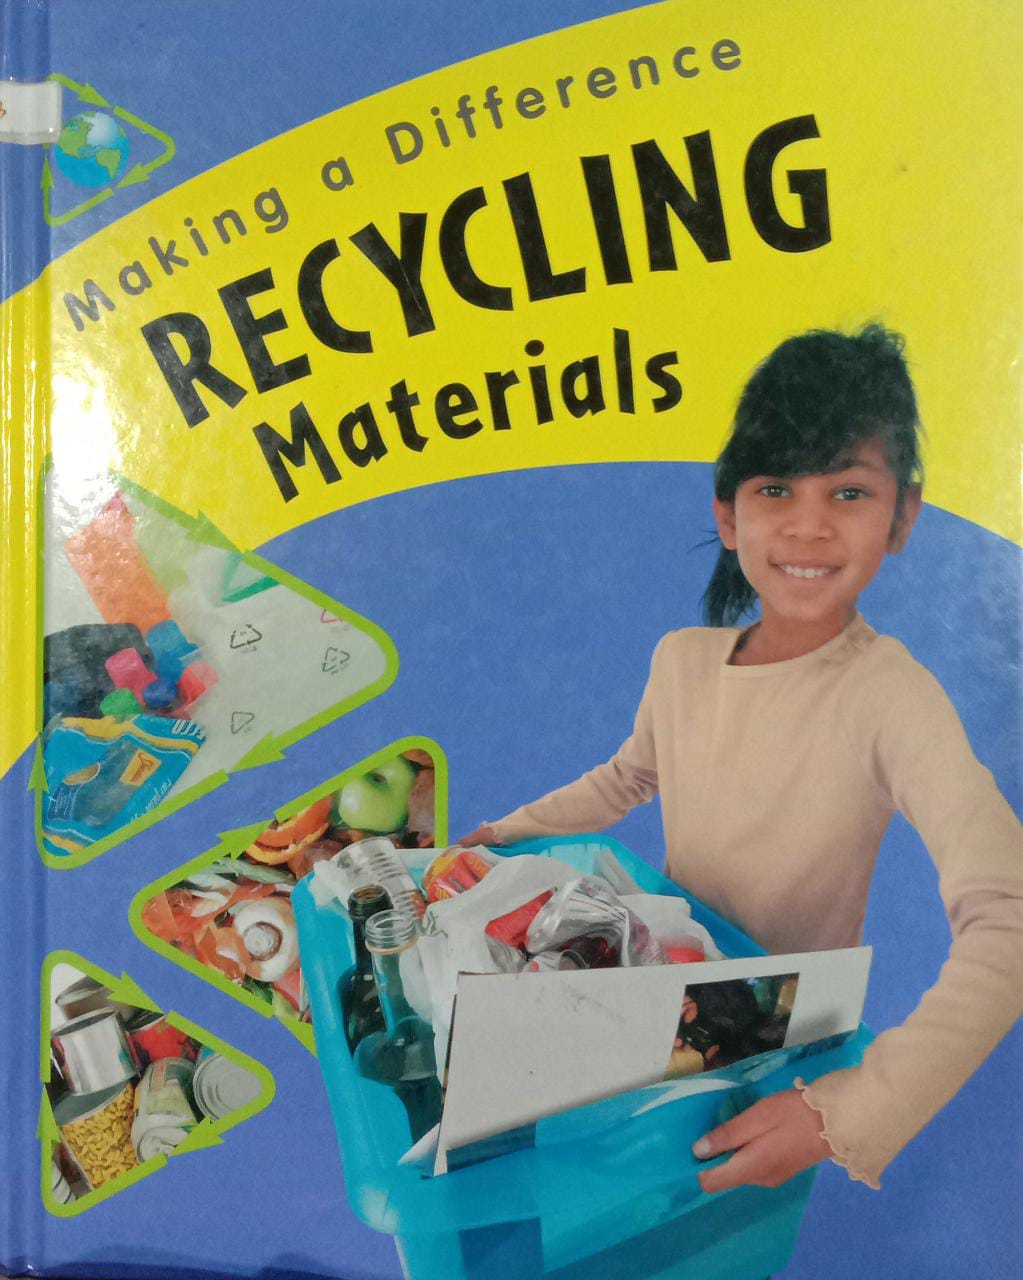 Making a Difference Recycling Materials